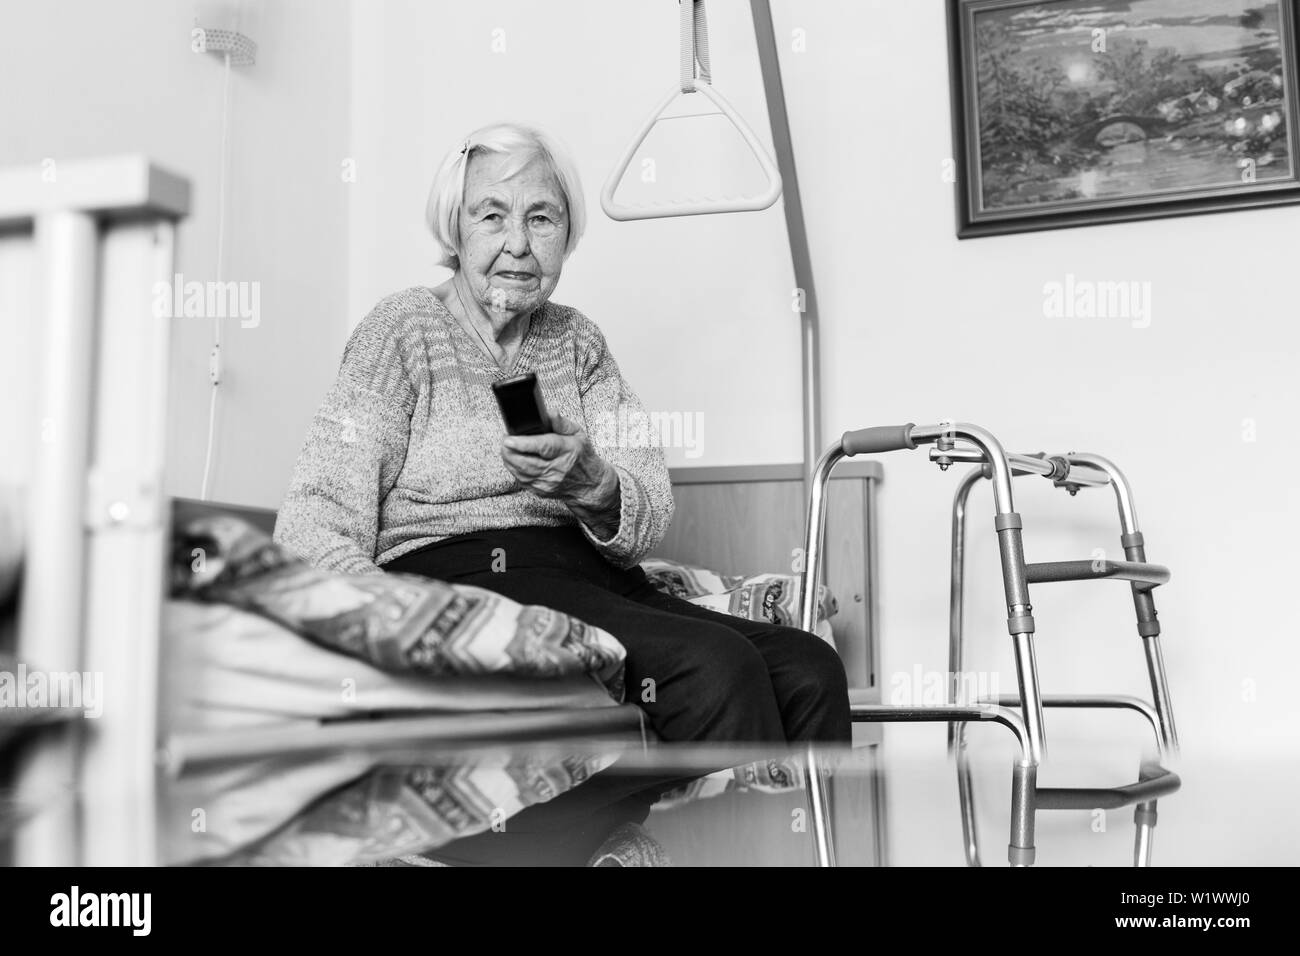 Elderly 96 years old woman operating TV or DVD with remote control Stock Photo